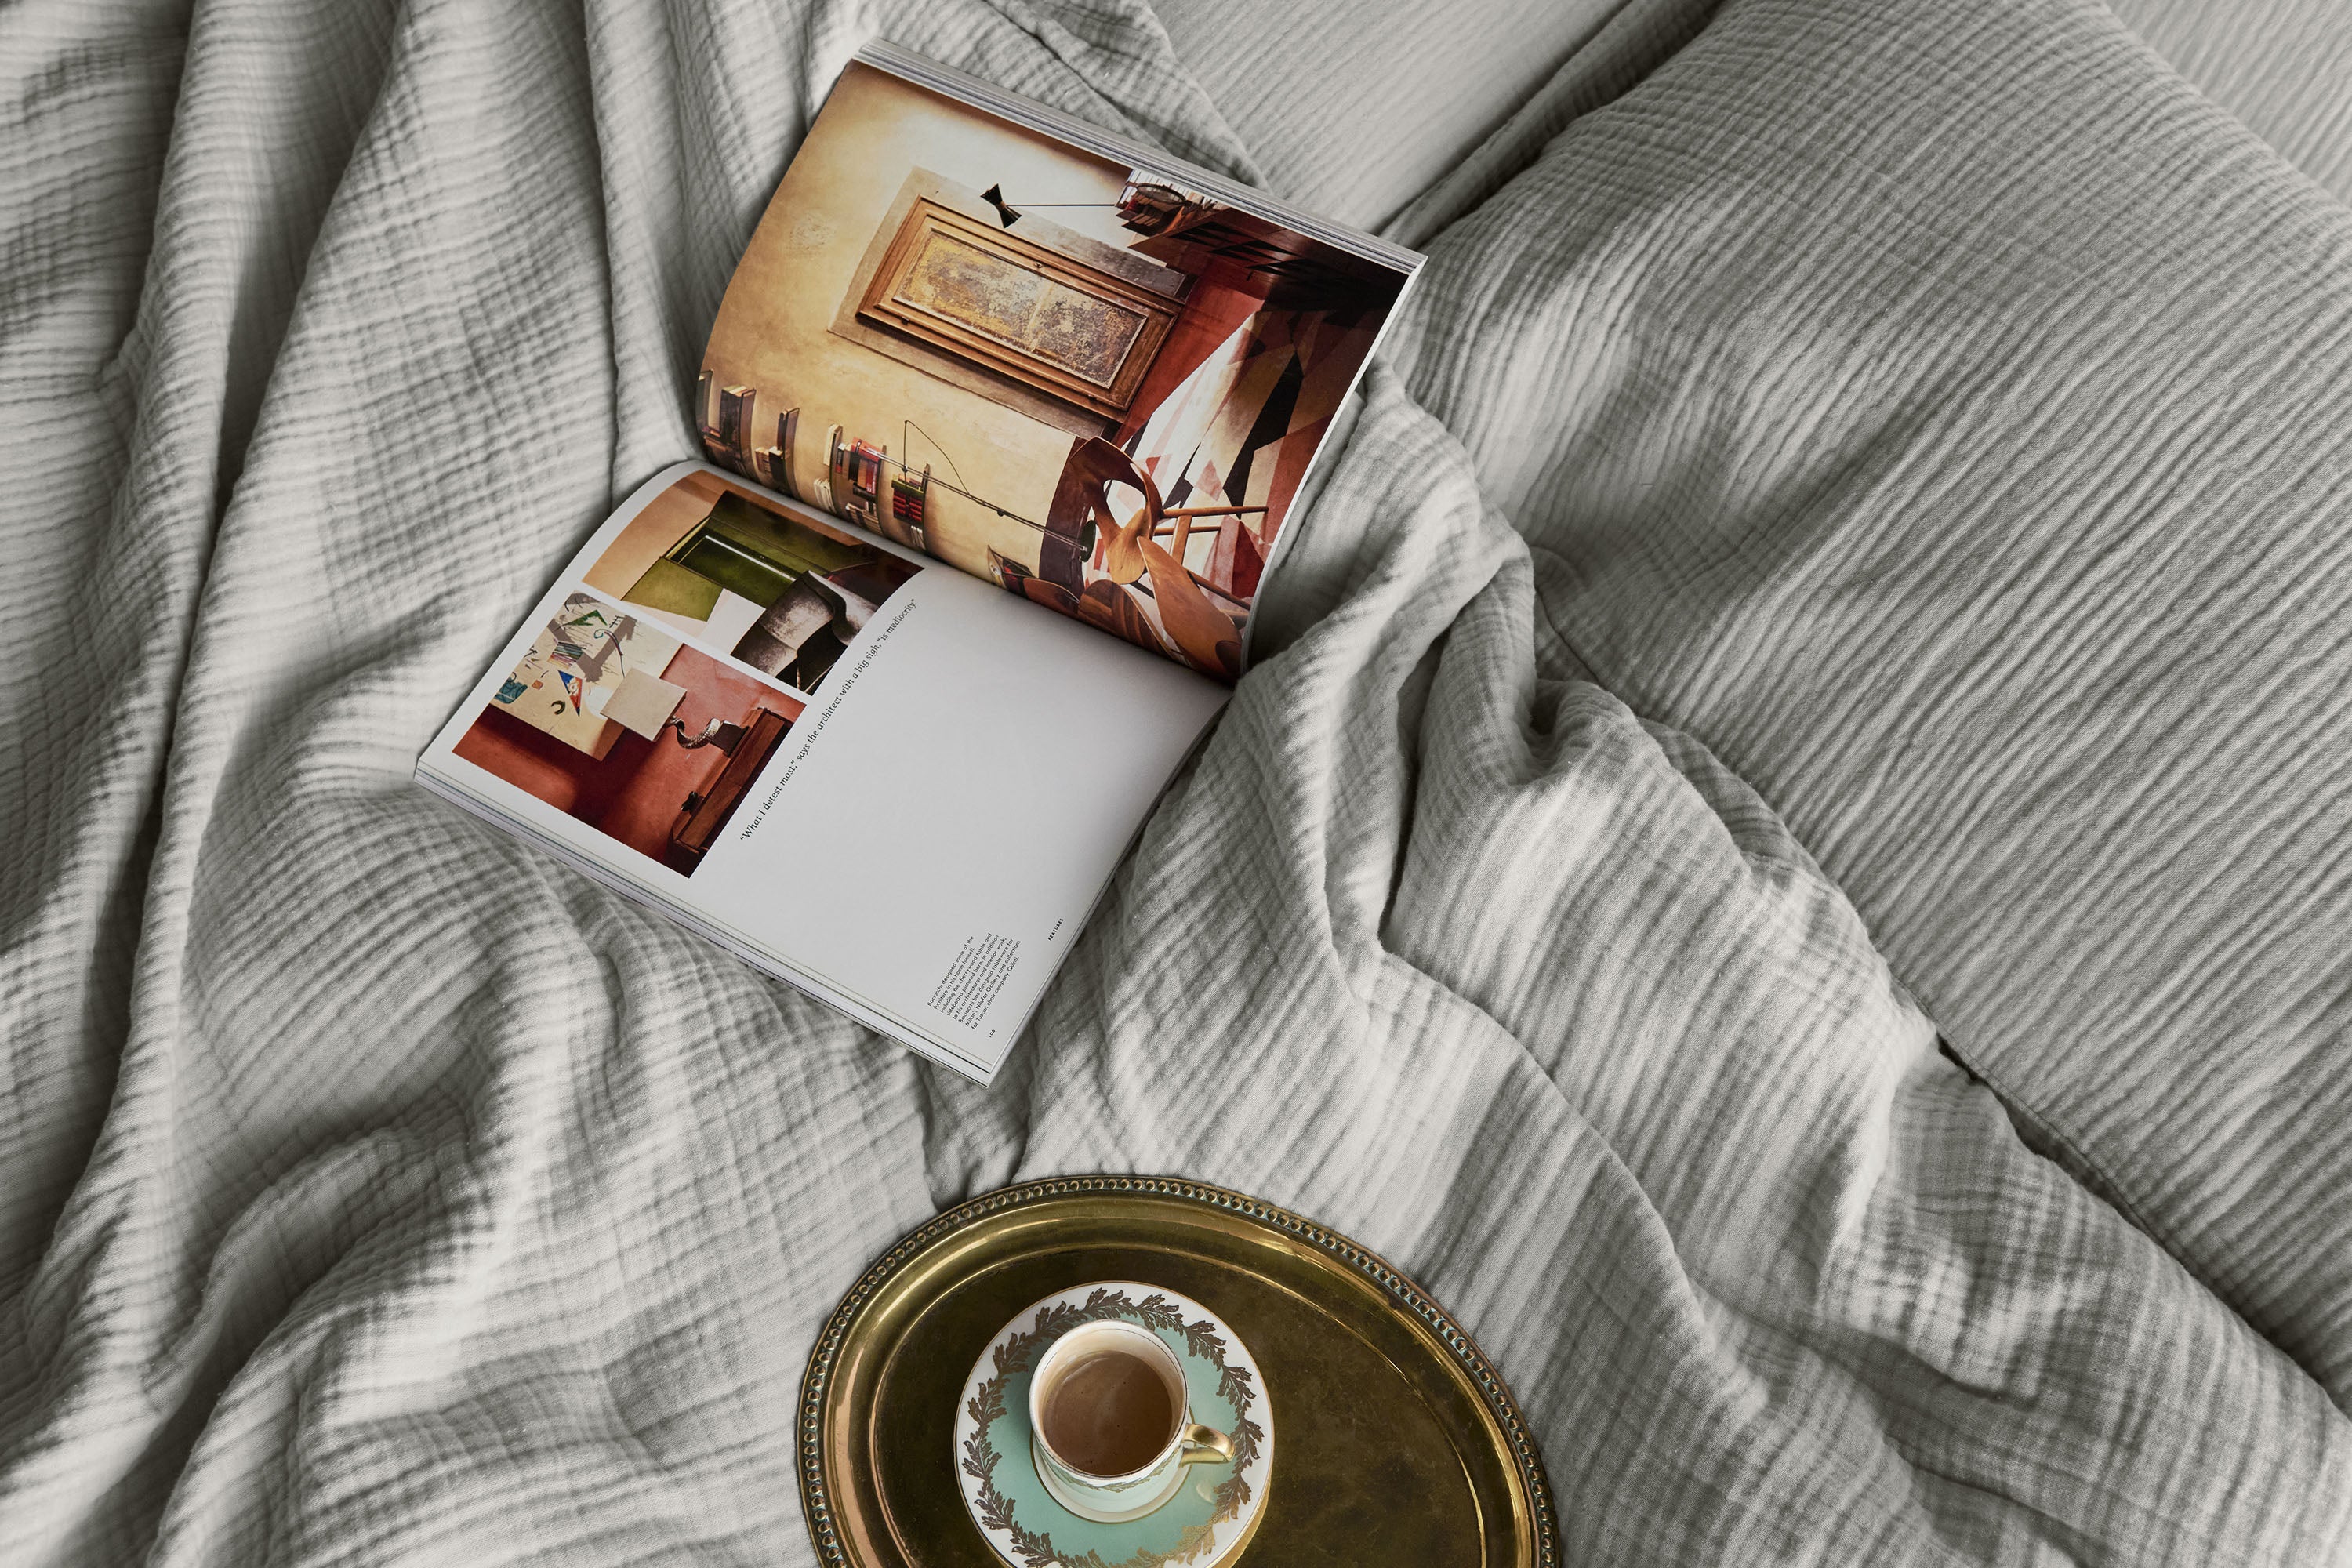 Top down view of a bed dressed in light grey muslin bedding, with a coffee cup on a gold tray and an open magazine